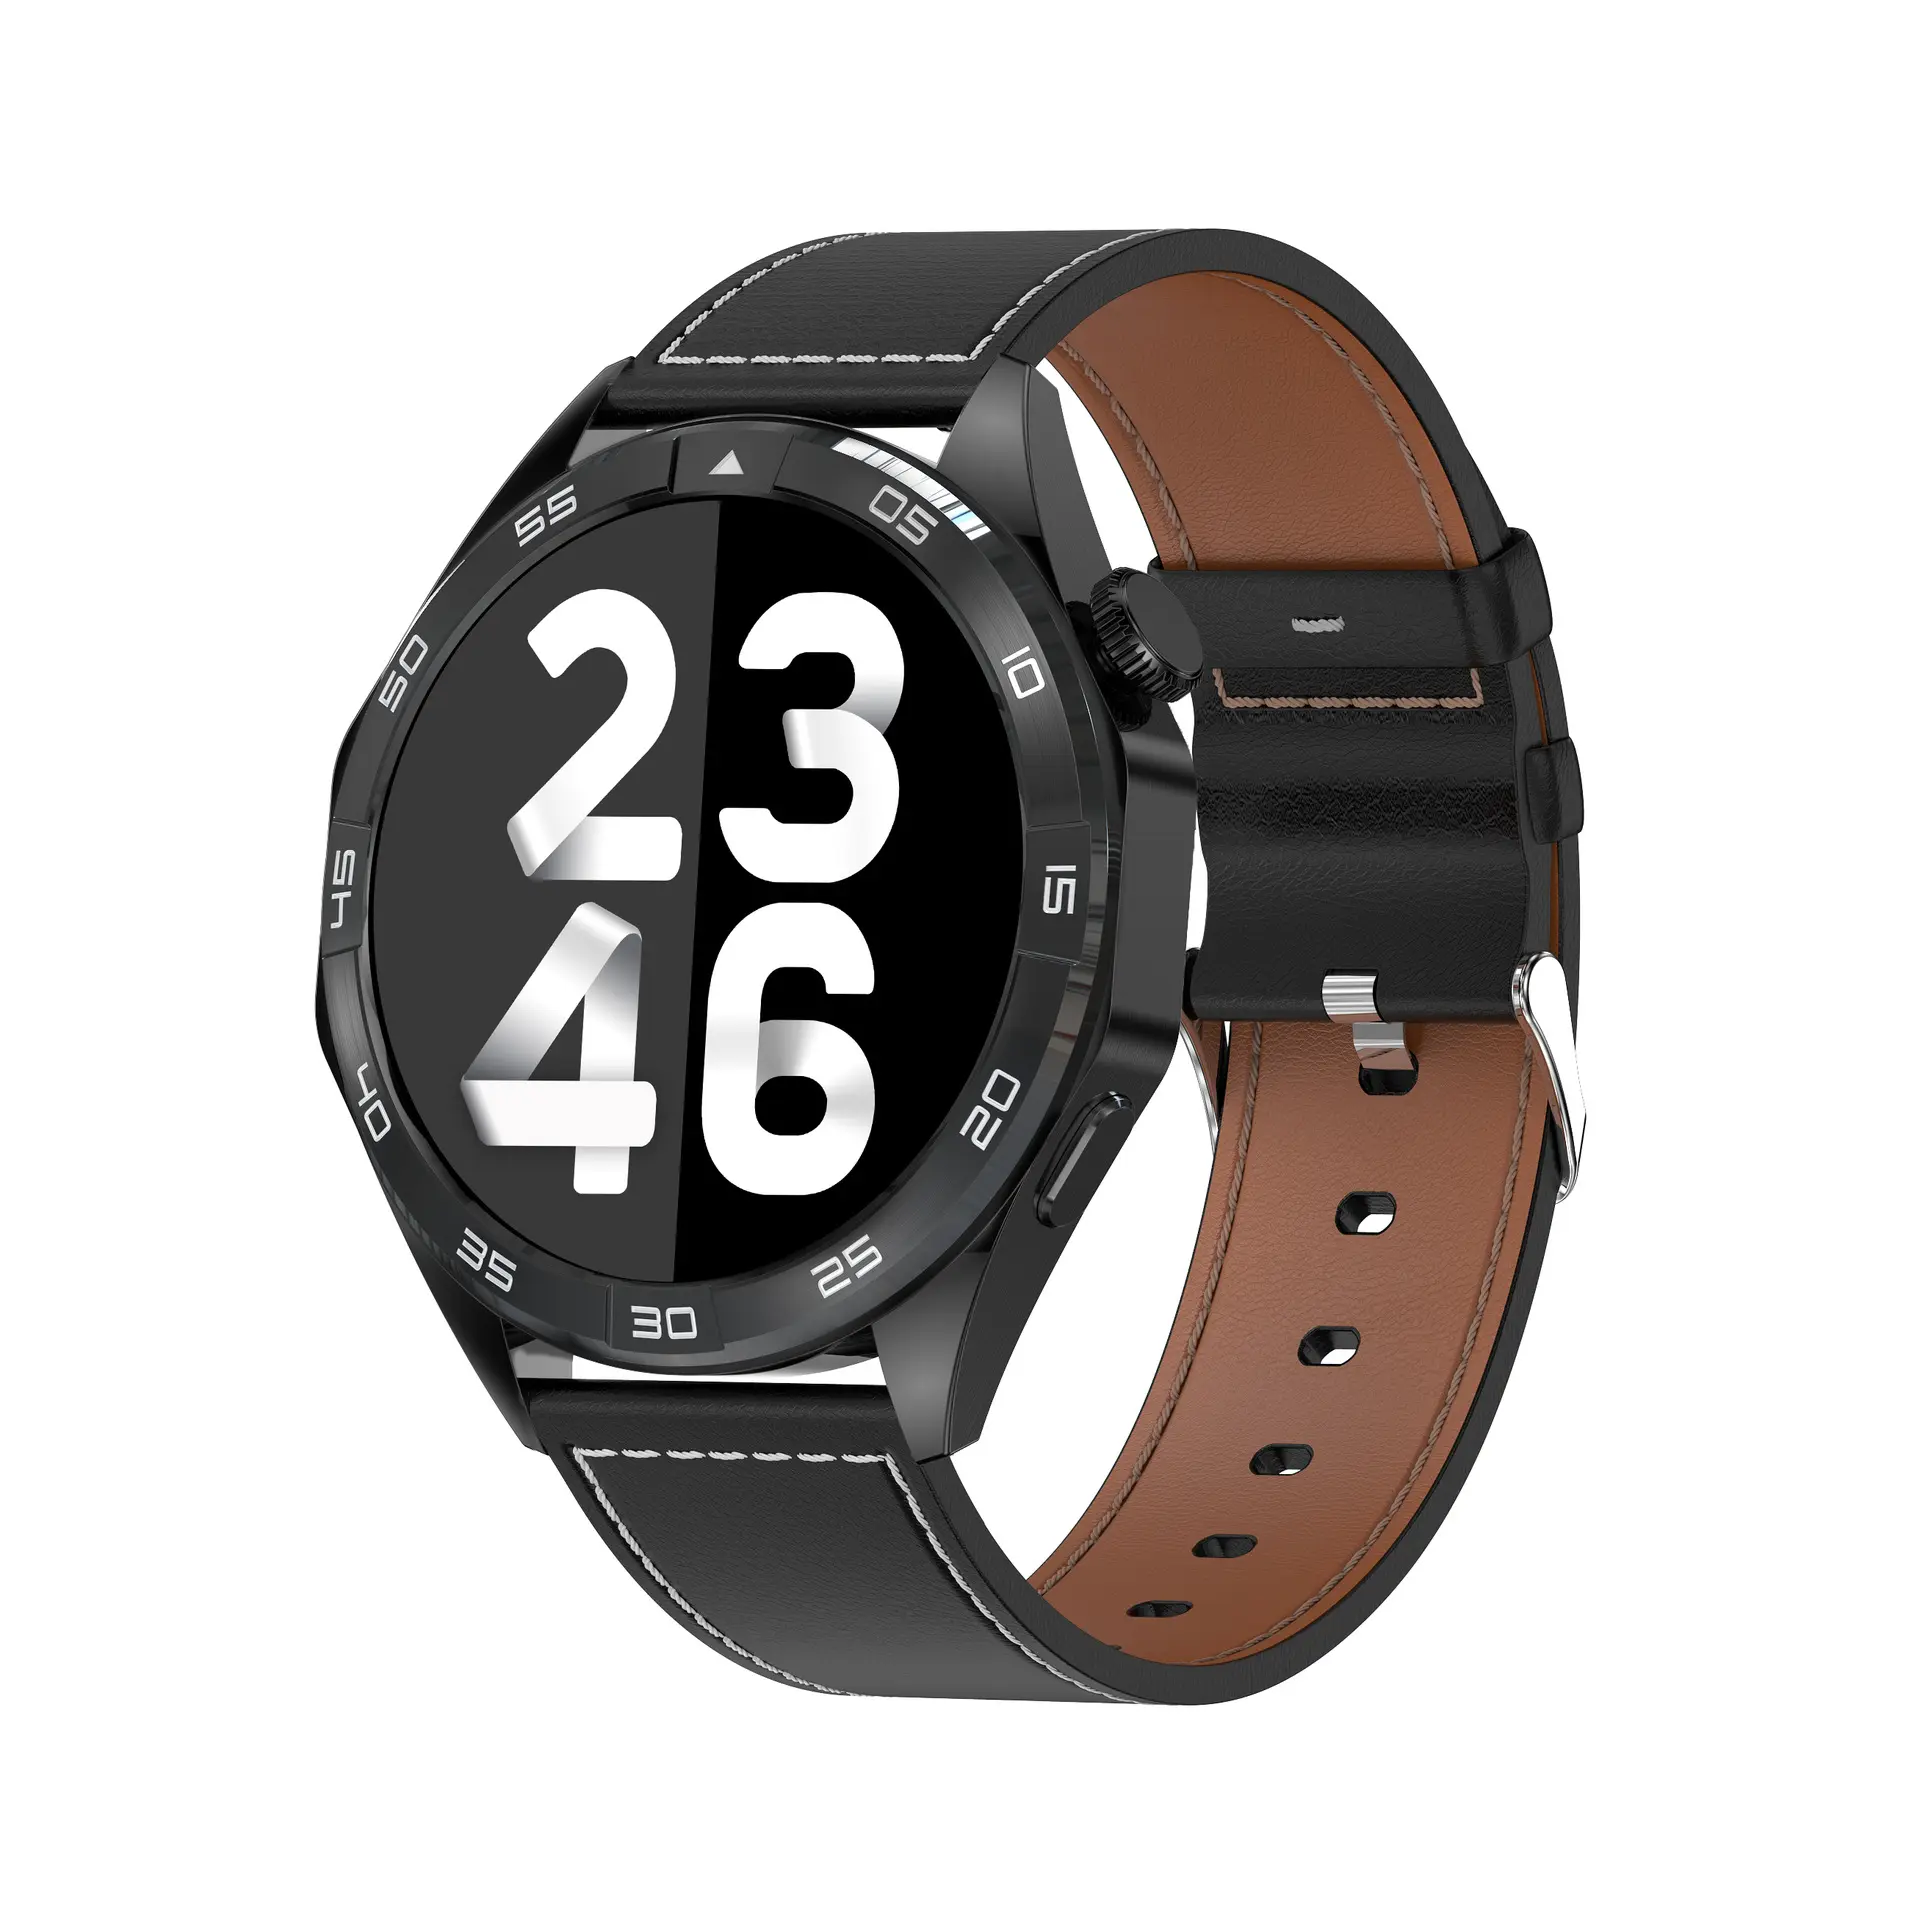 EX105 high-end fashion smartwatch with dual Bluetooth information sports mode watch must-have watch for fashionable men